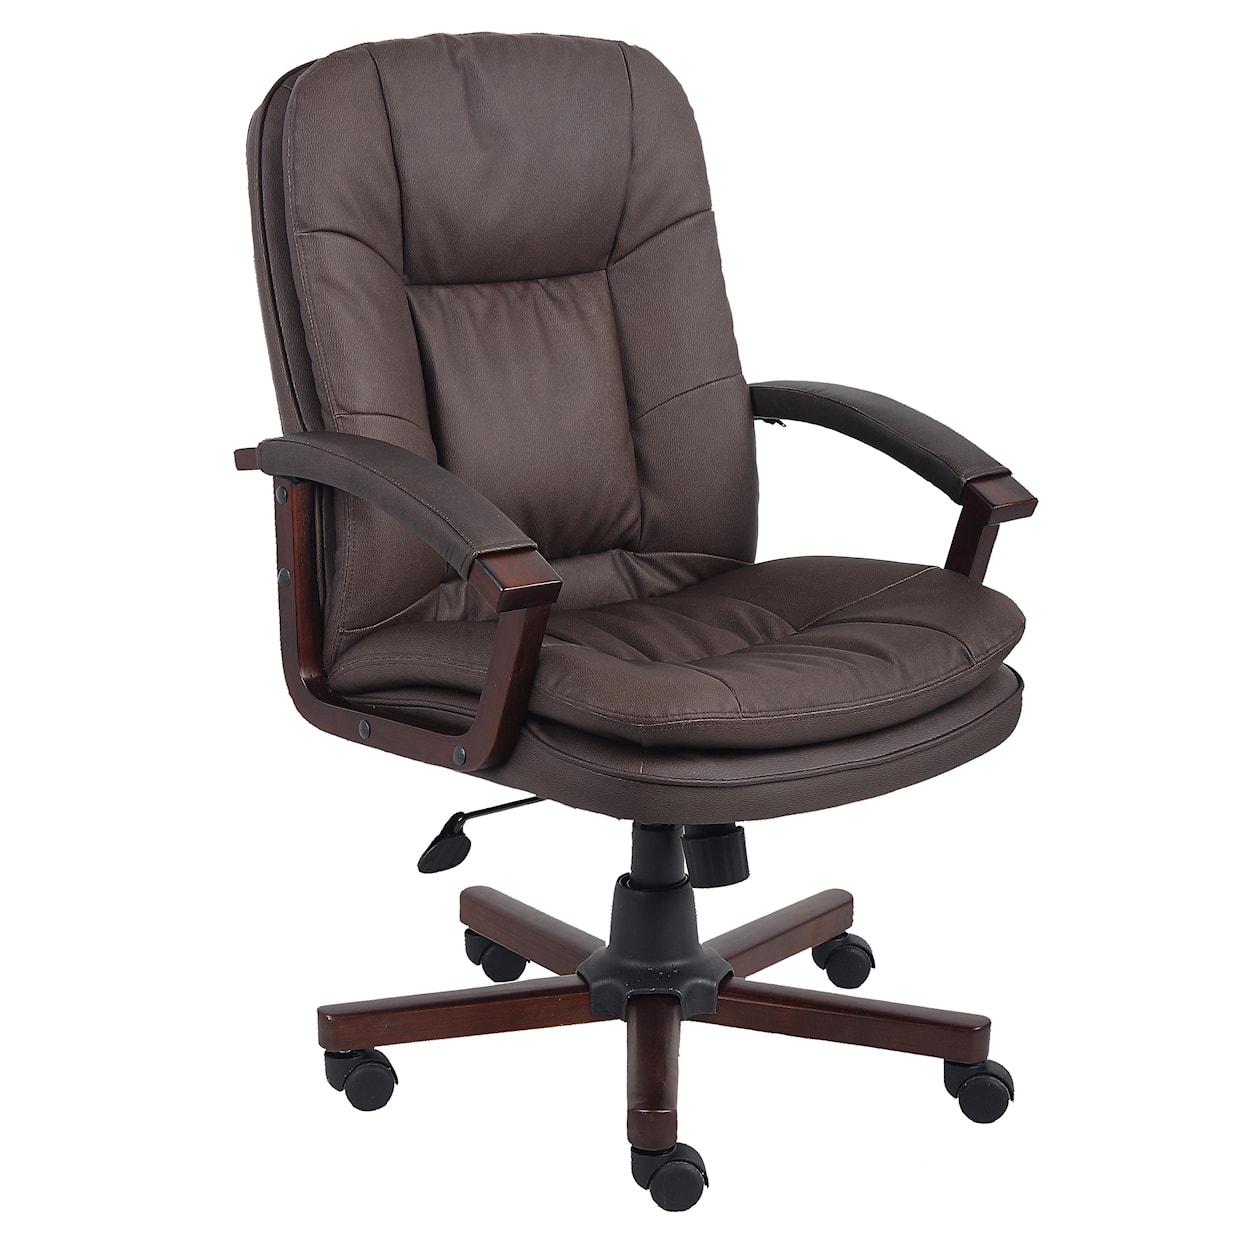 Presidential Seating Executive Chairs Bomber Brown LeatherPlus Executive Chair